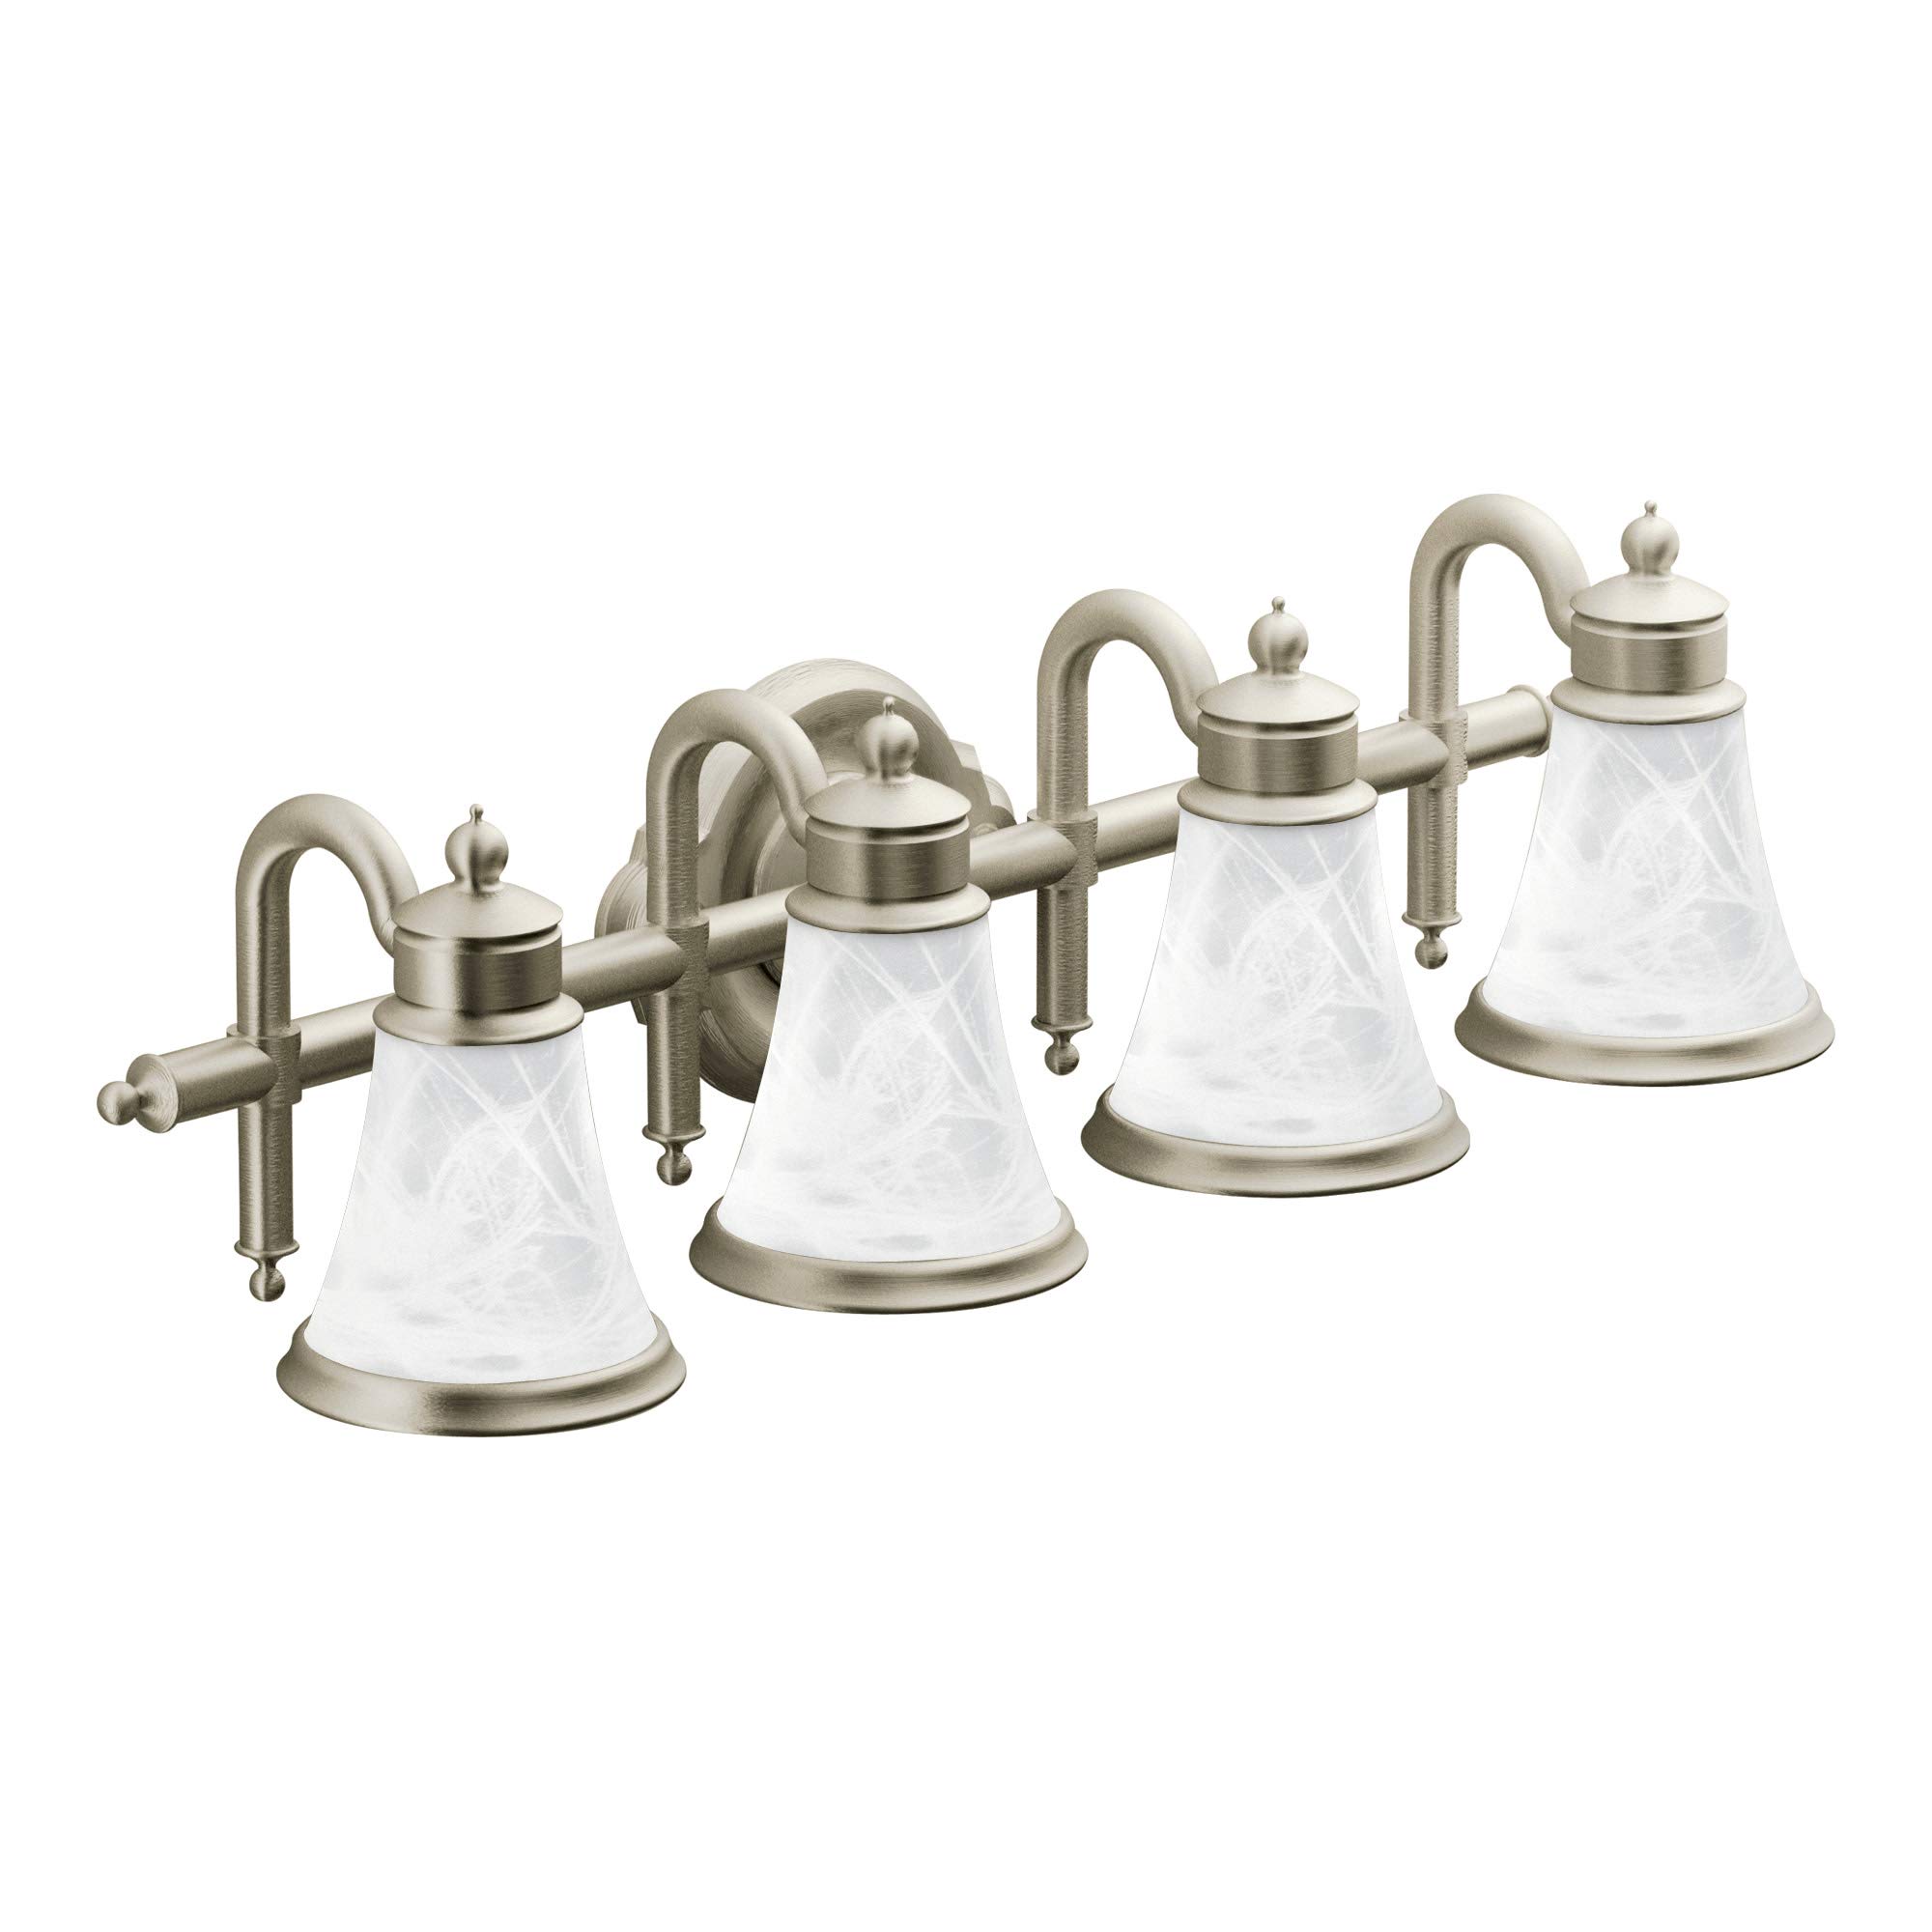 Moen YB9864BN Waterhill 4-Light Dual-Mount Bath Bathroom Vanity Fixture with Frosted Glass, Brushed Nickel 10.60 x 35.00 x 9.10 inches